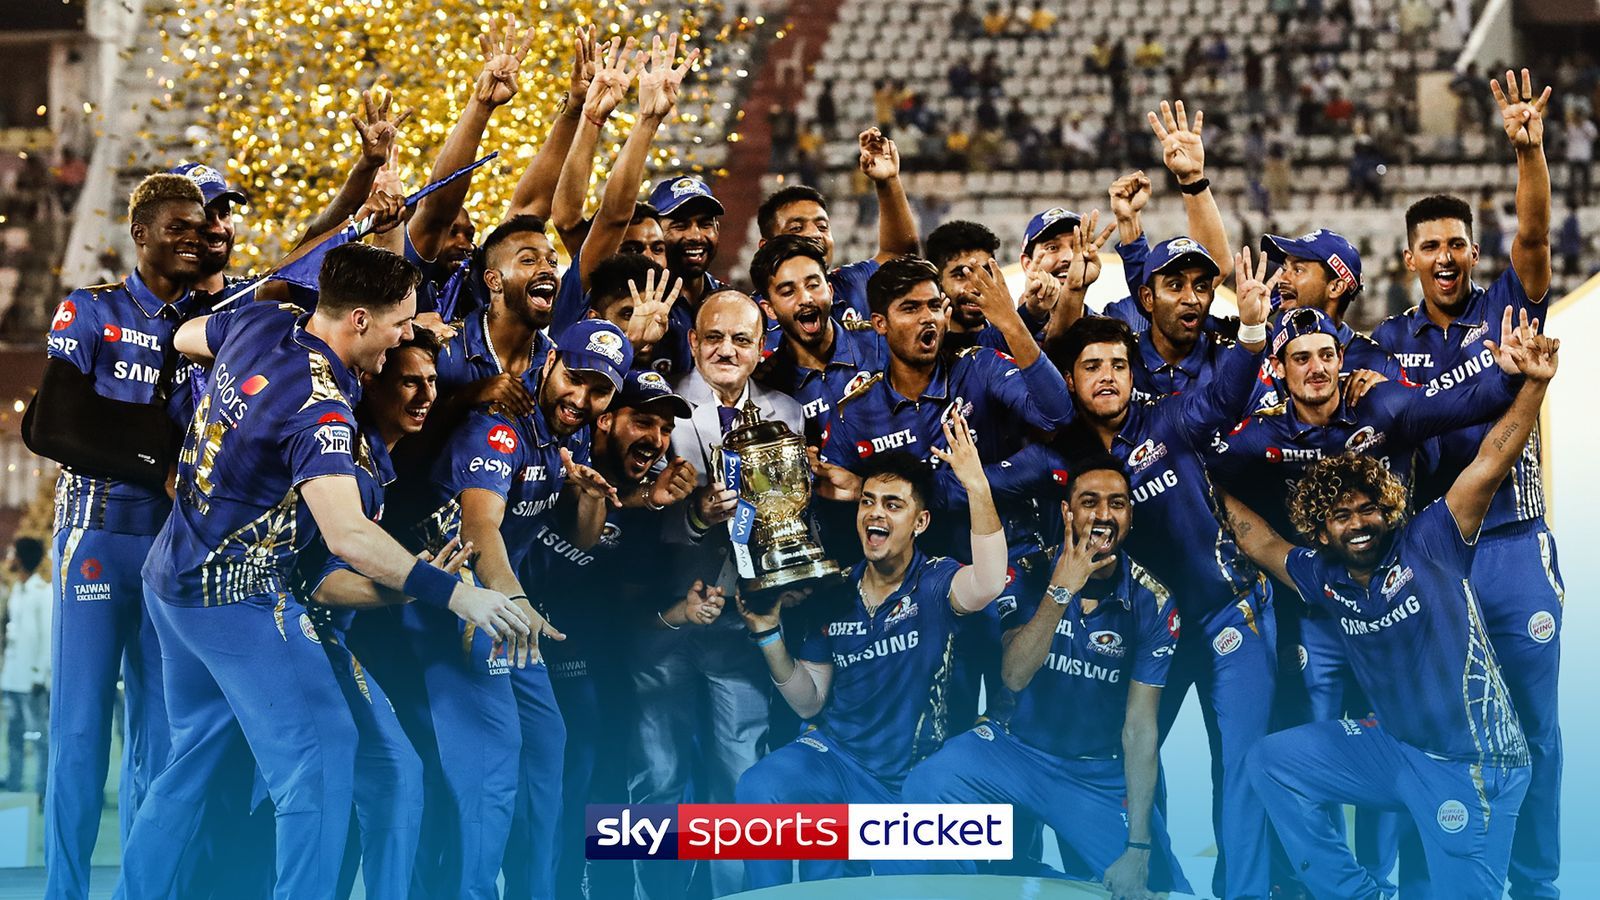 IPL Returns To Sky Sports In 2020 As Part Of A Three Year Contract